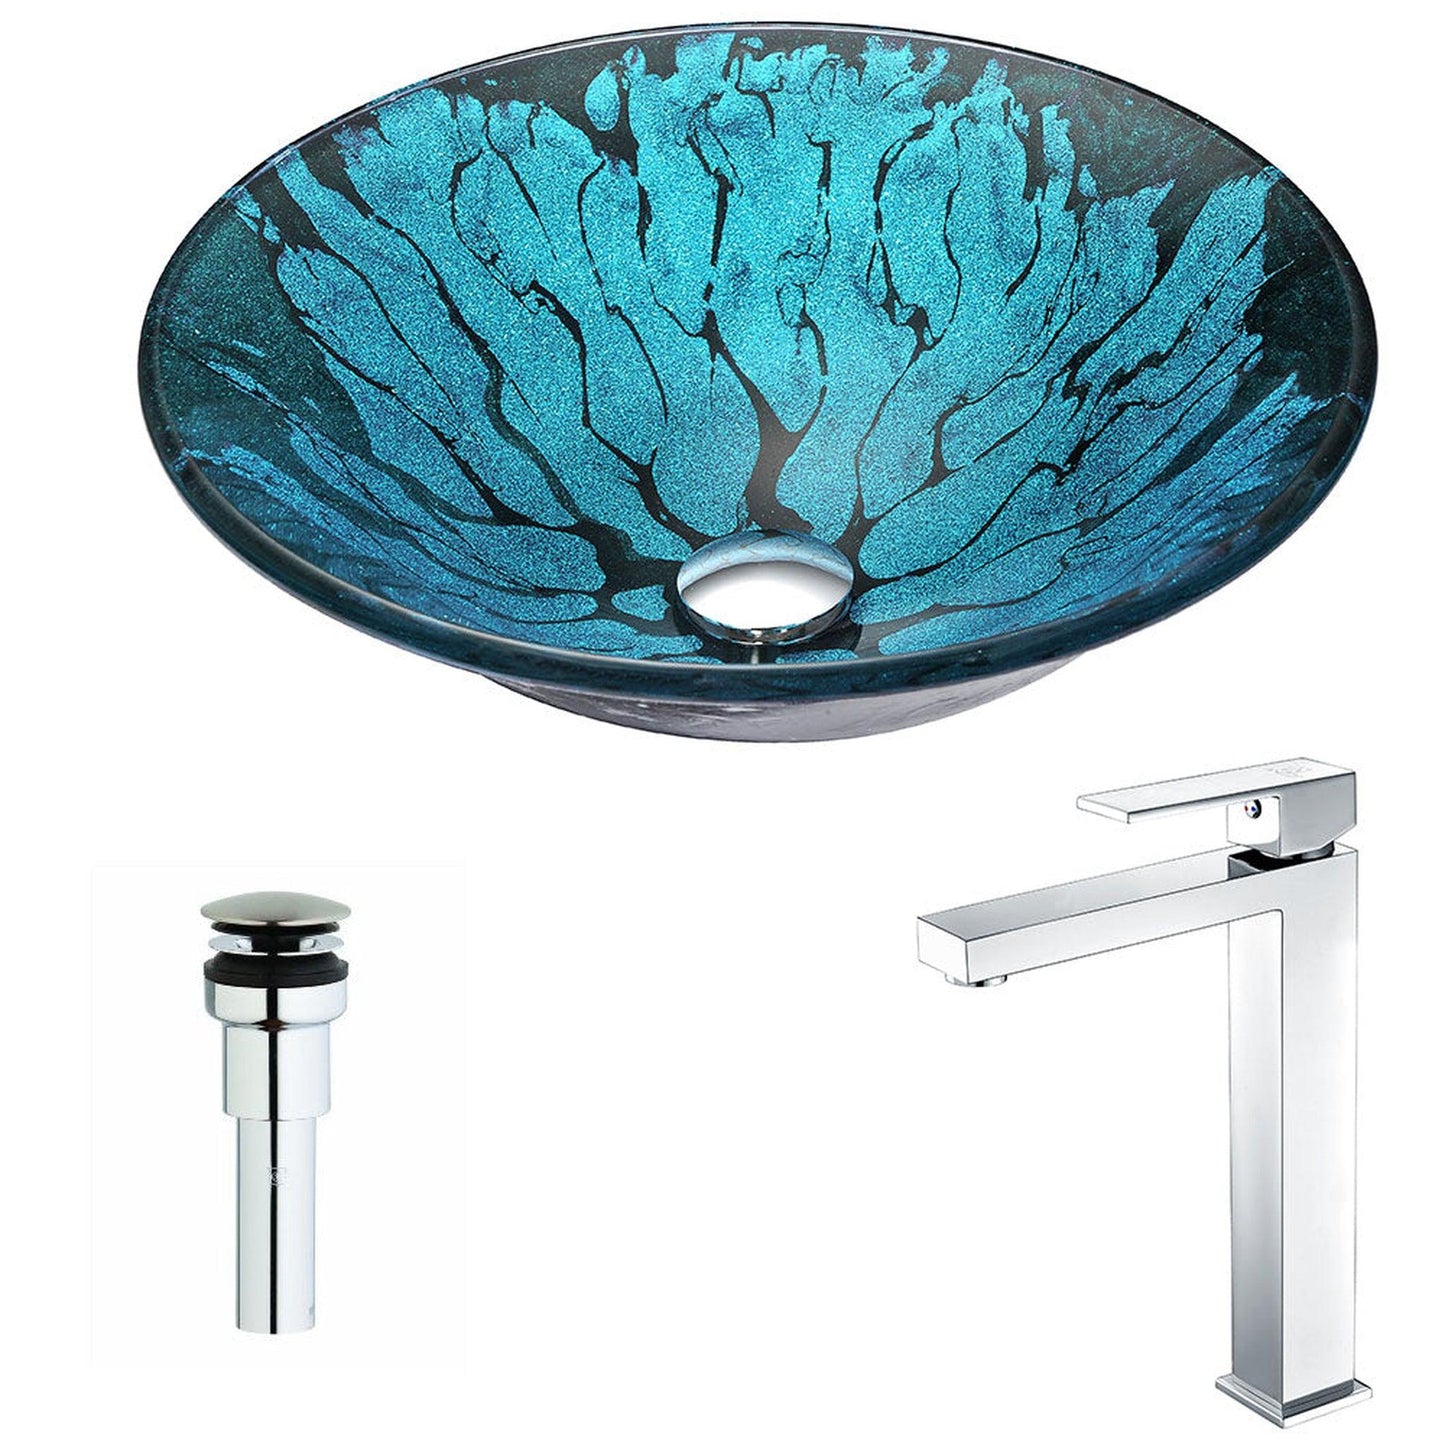 ANZZI Key Series 17" x 17" Round Lustrous Blue and Black Deco-Glass Vessel Sink With Polished Chrome Pop-Up Drain and Enti Faucet